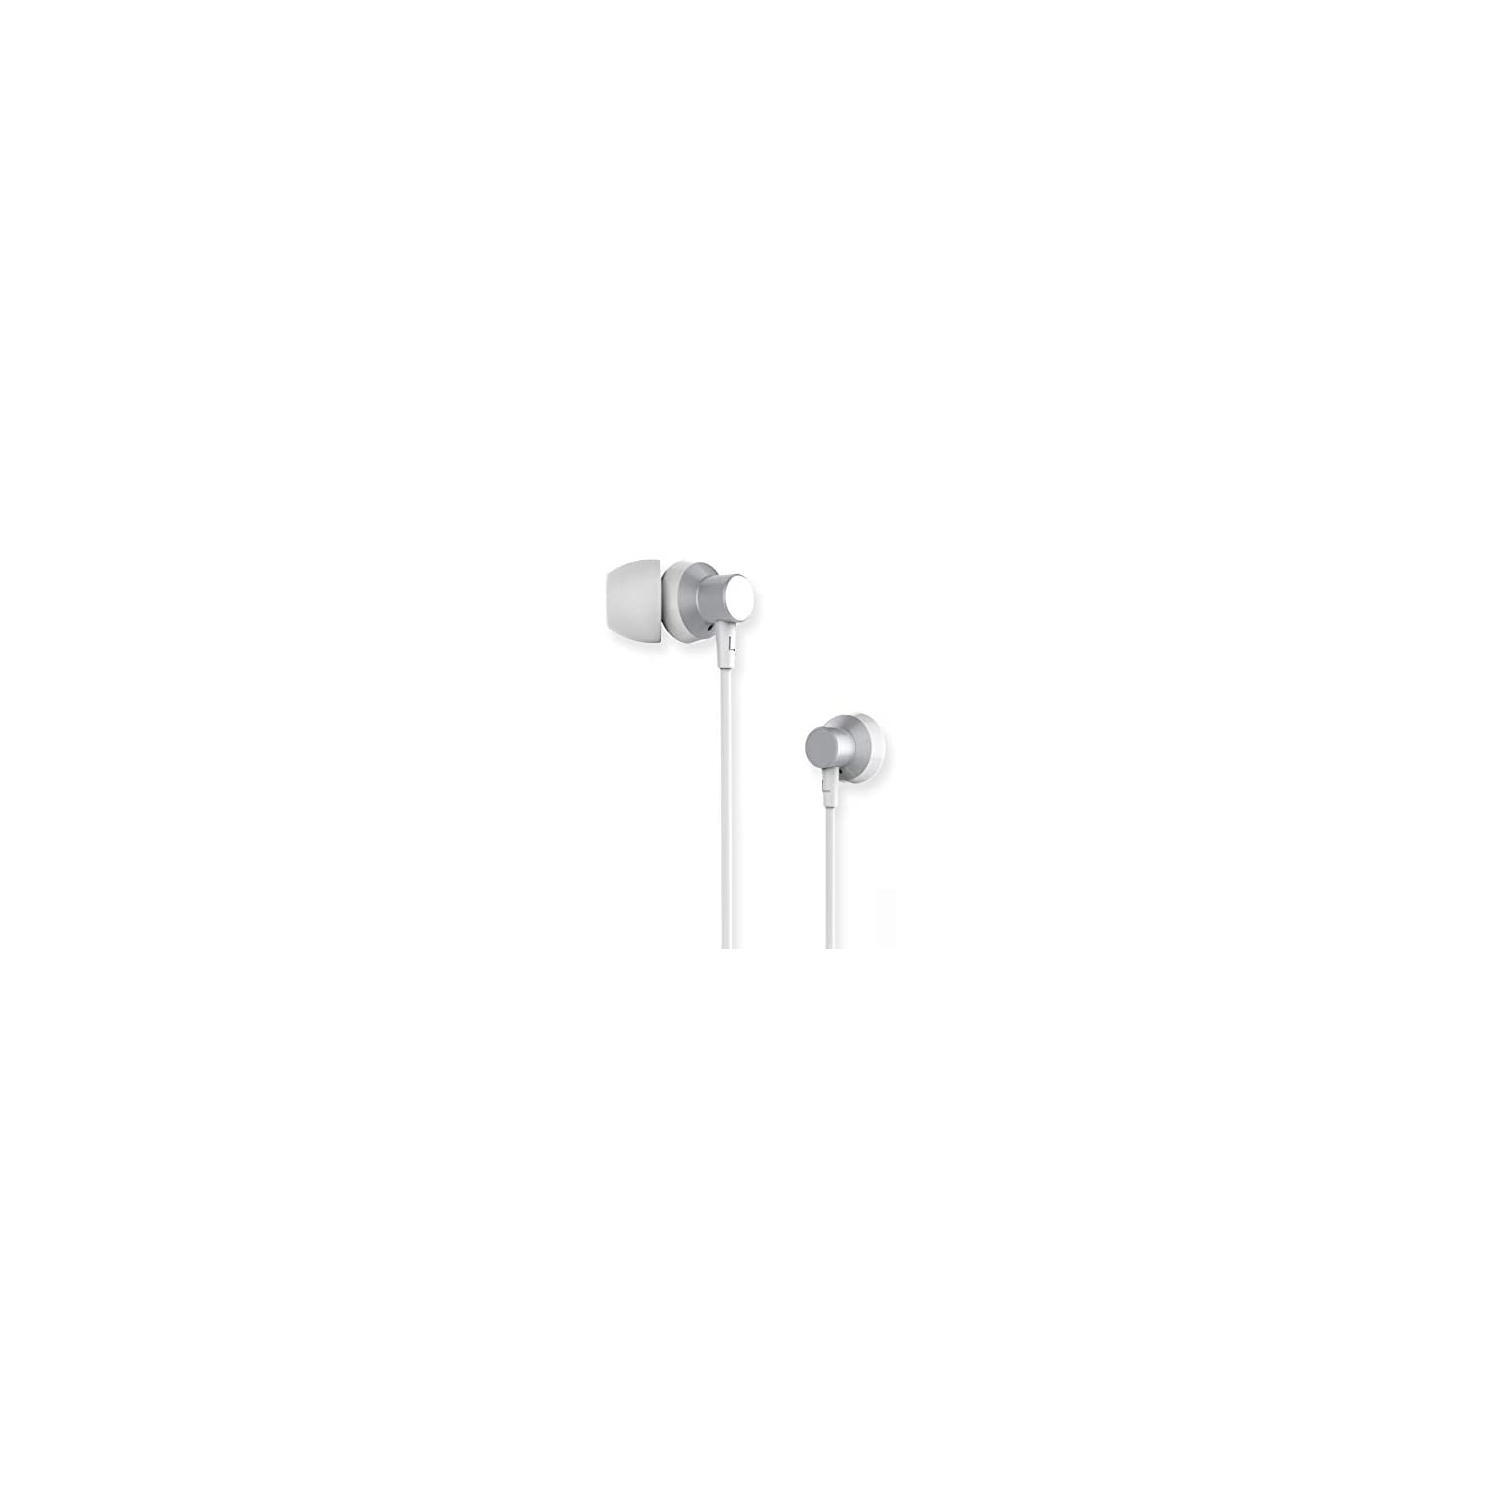 Remax RM-512 3.5mm Wired Music Headset Music Earphone Heavy Bass in-Ear Headphone for iPhone Samsung Xiaomi (Silver)